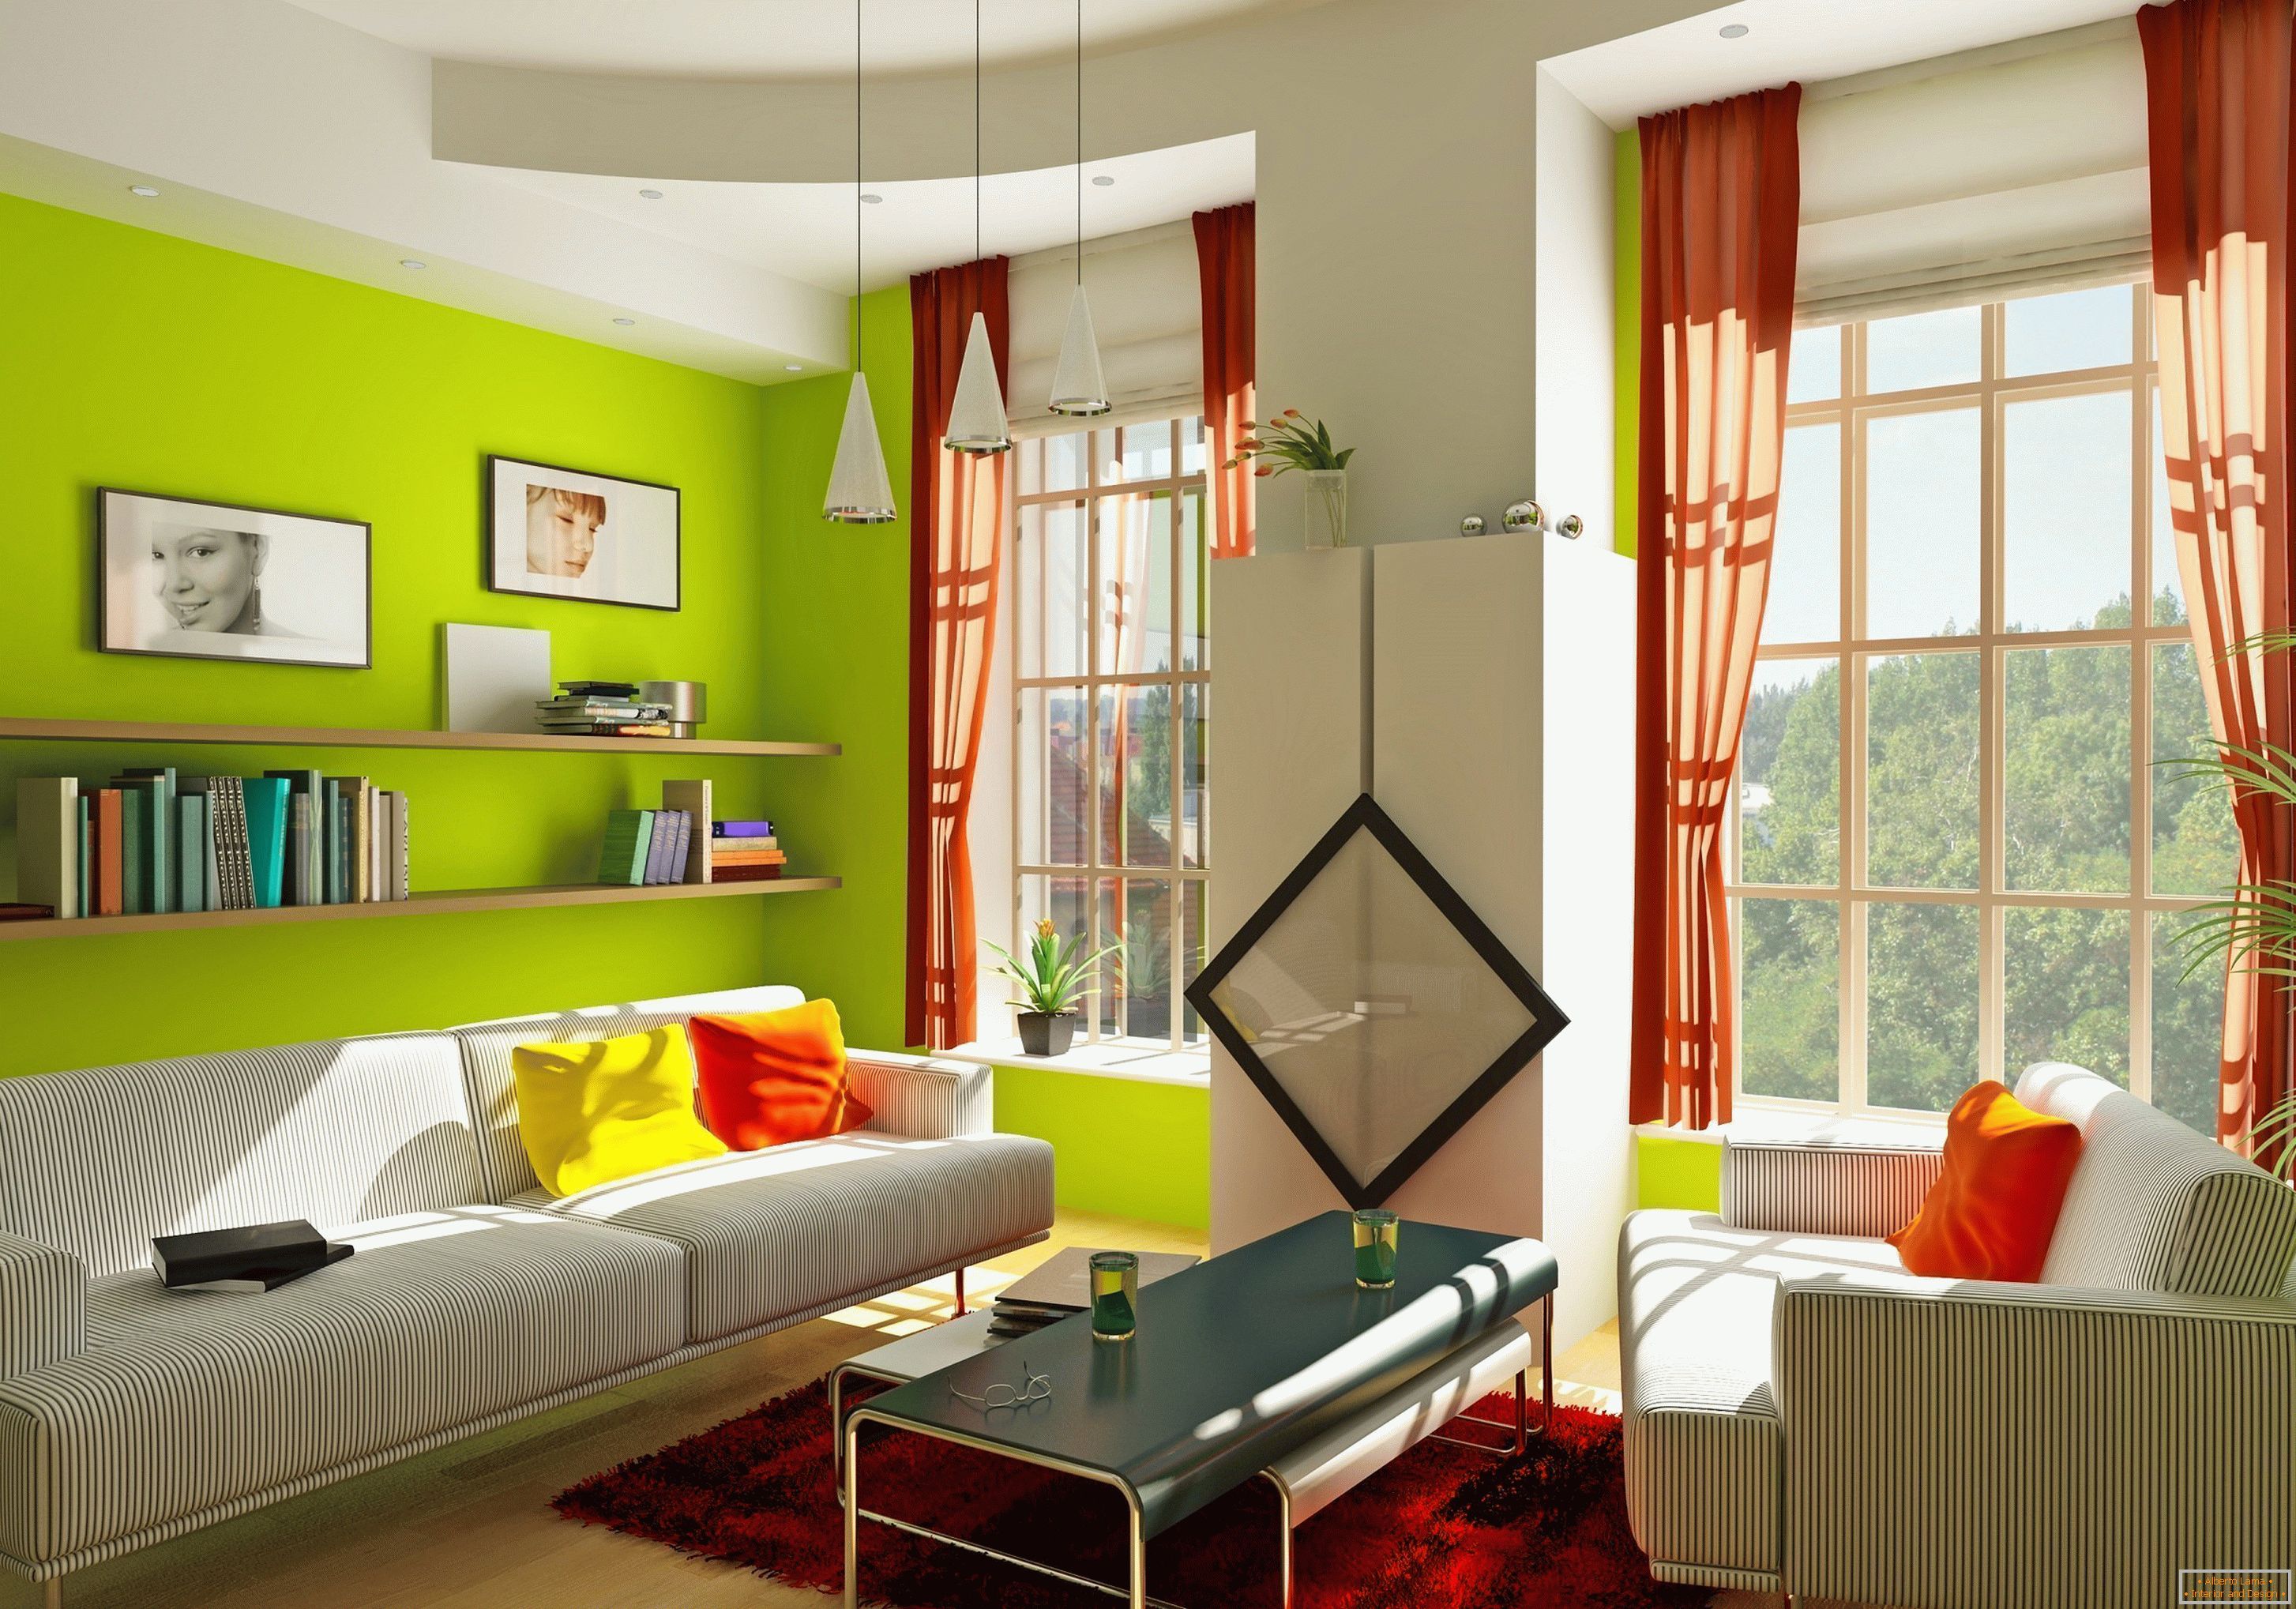 The combination of green wallpaper with red curtains